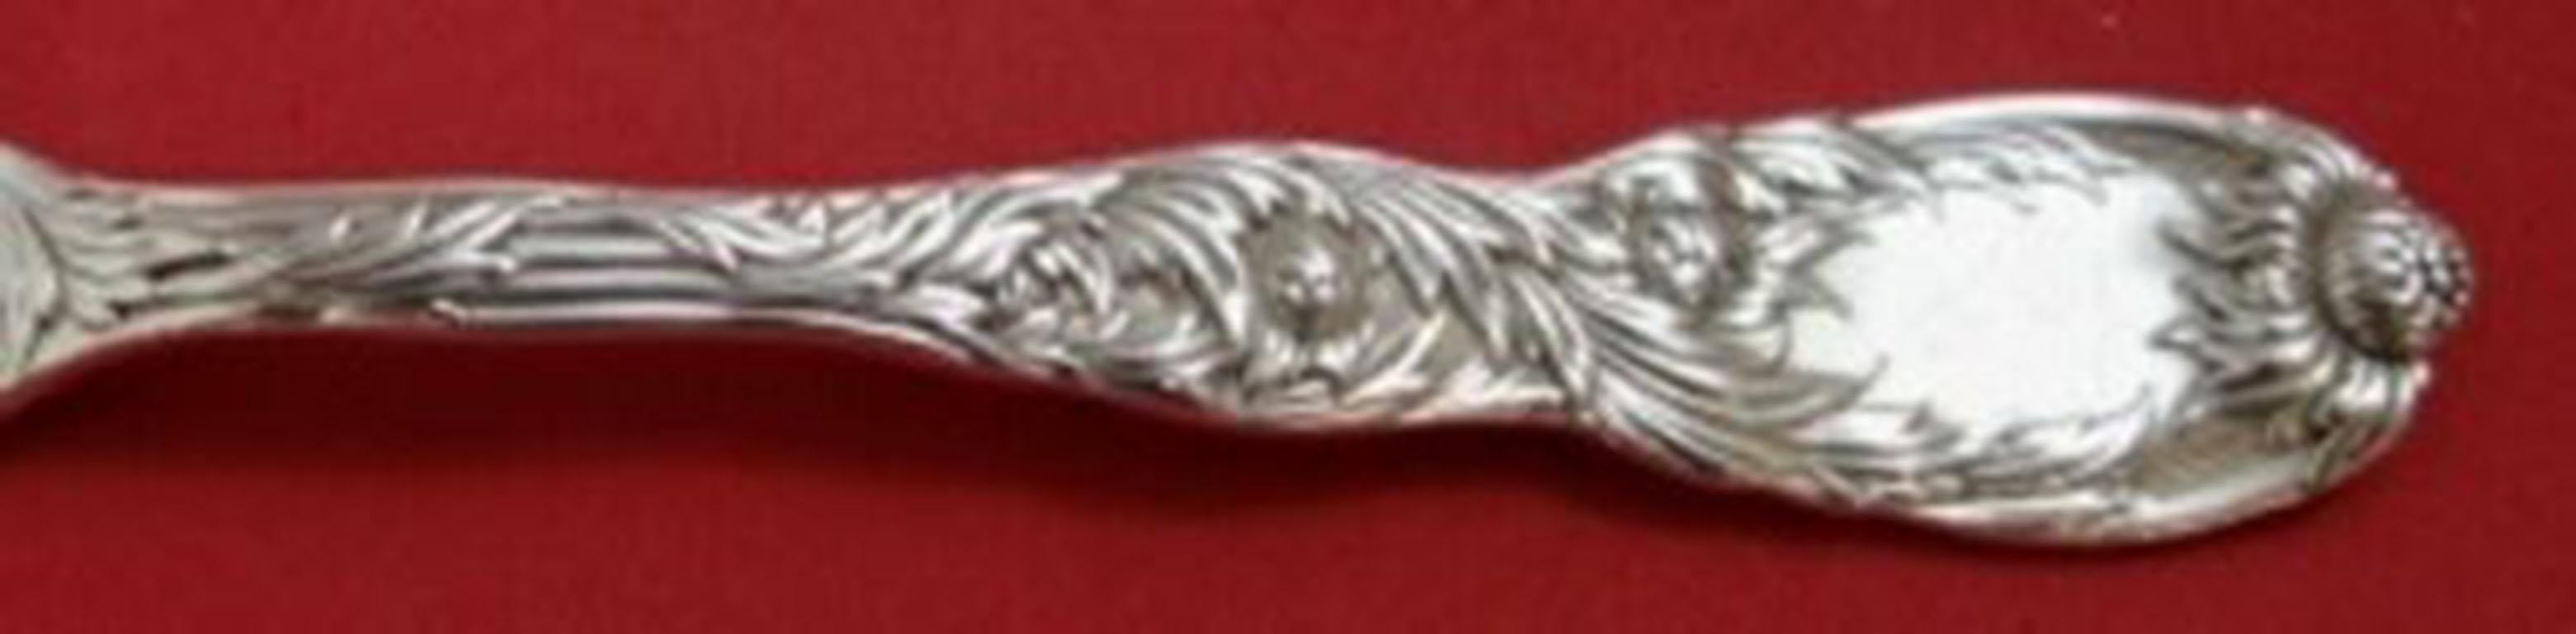 Sterling silver fish server with design on blade 12 3/8